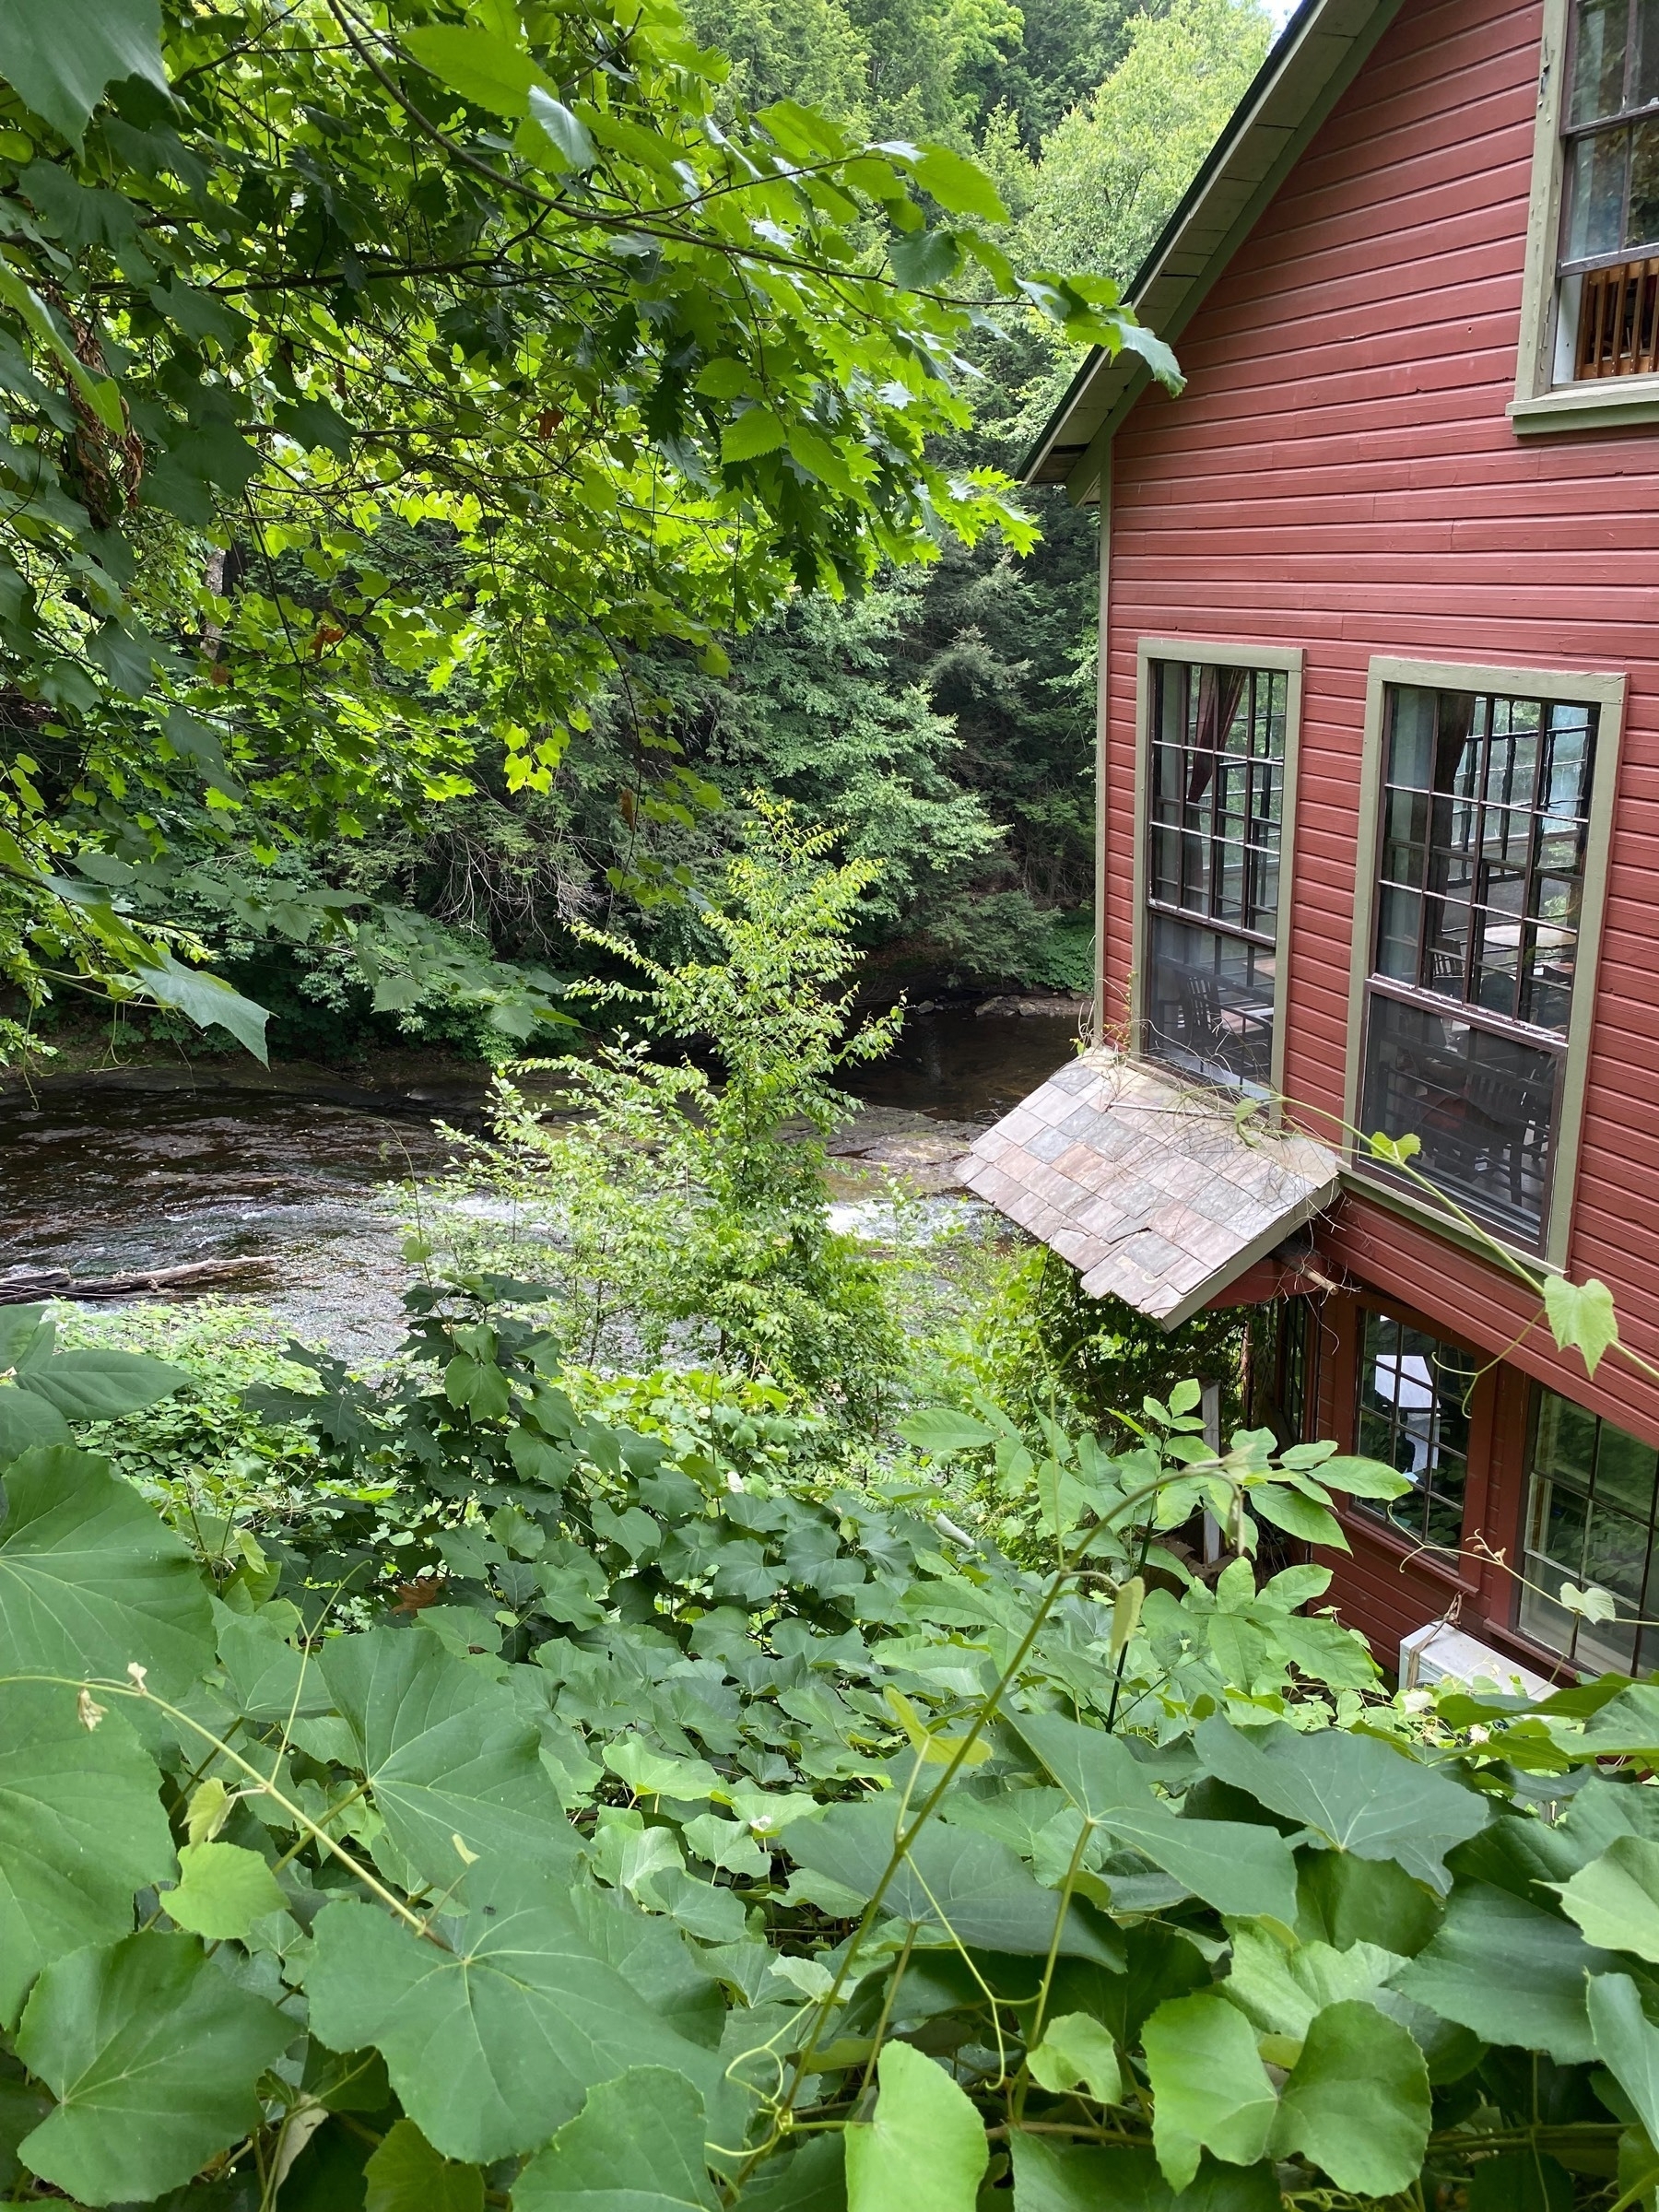 View of a stream surrounded by green leaves above and below, with the reddish wall of a wooden building on the right.